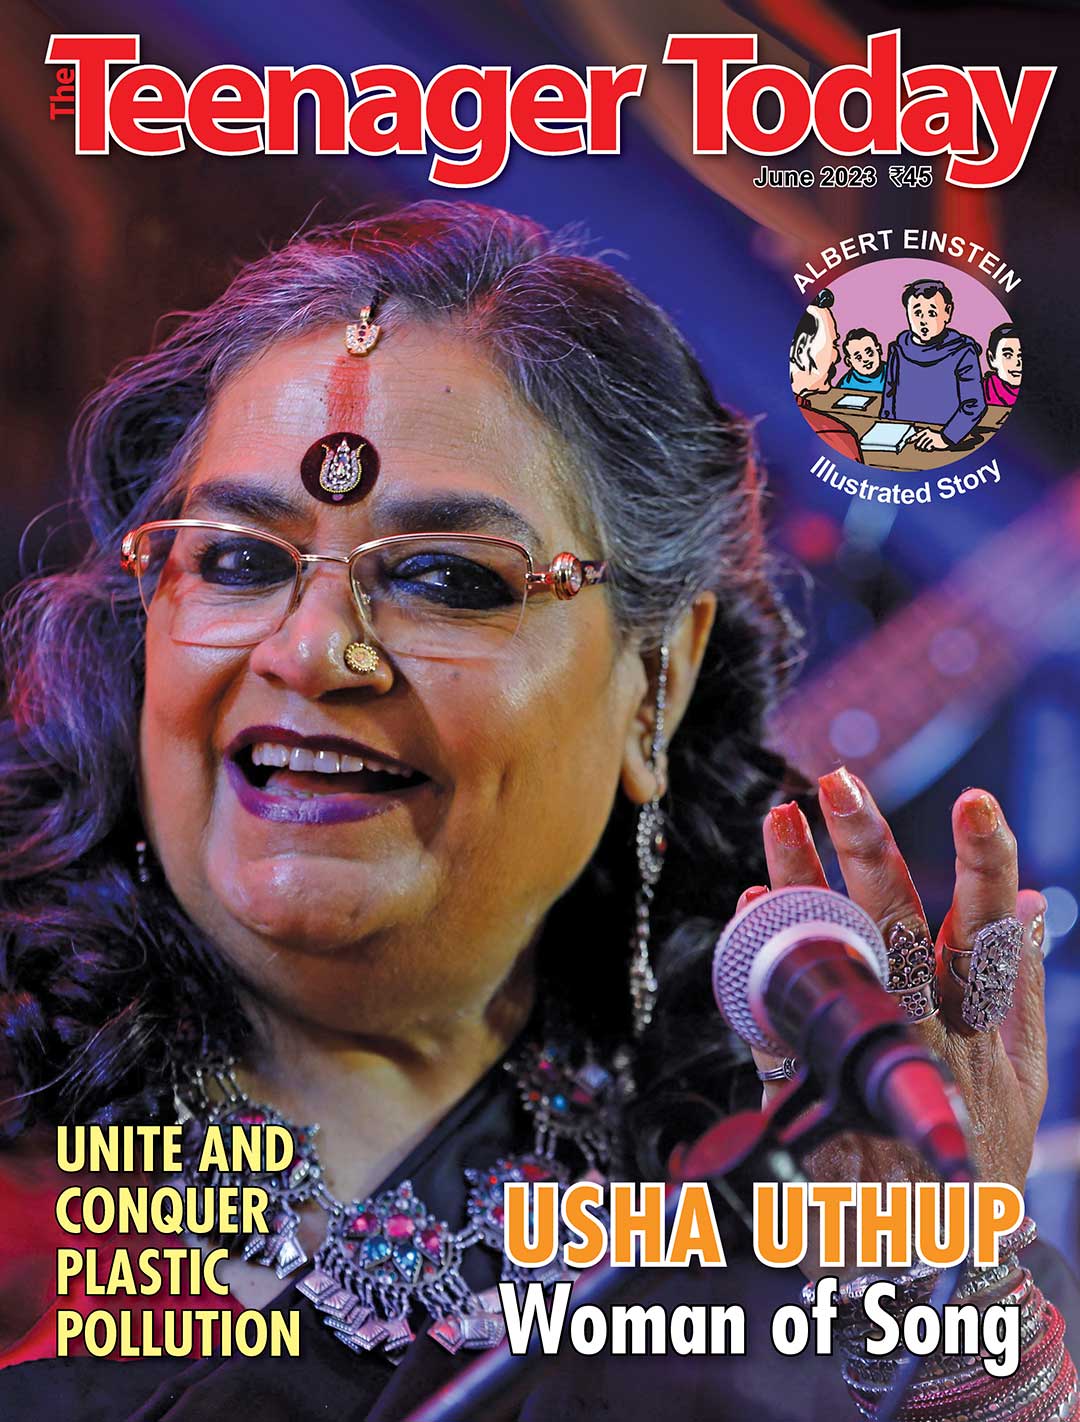 Cover of the June 2023 issue of The Teenager Today featuring Usha Uthup.